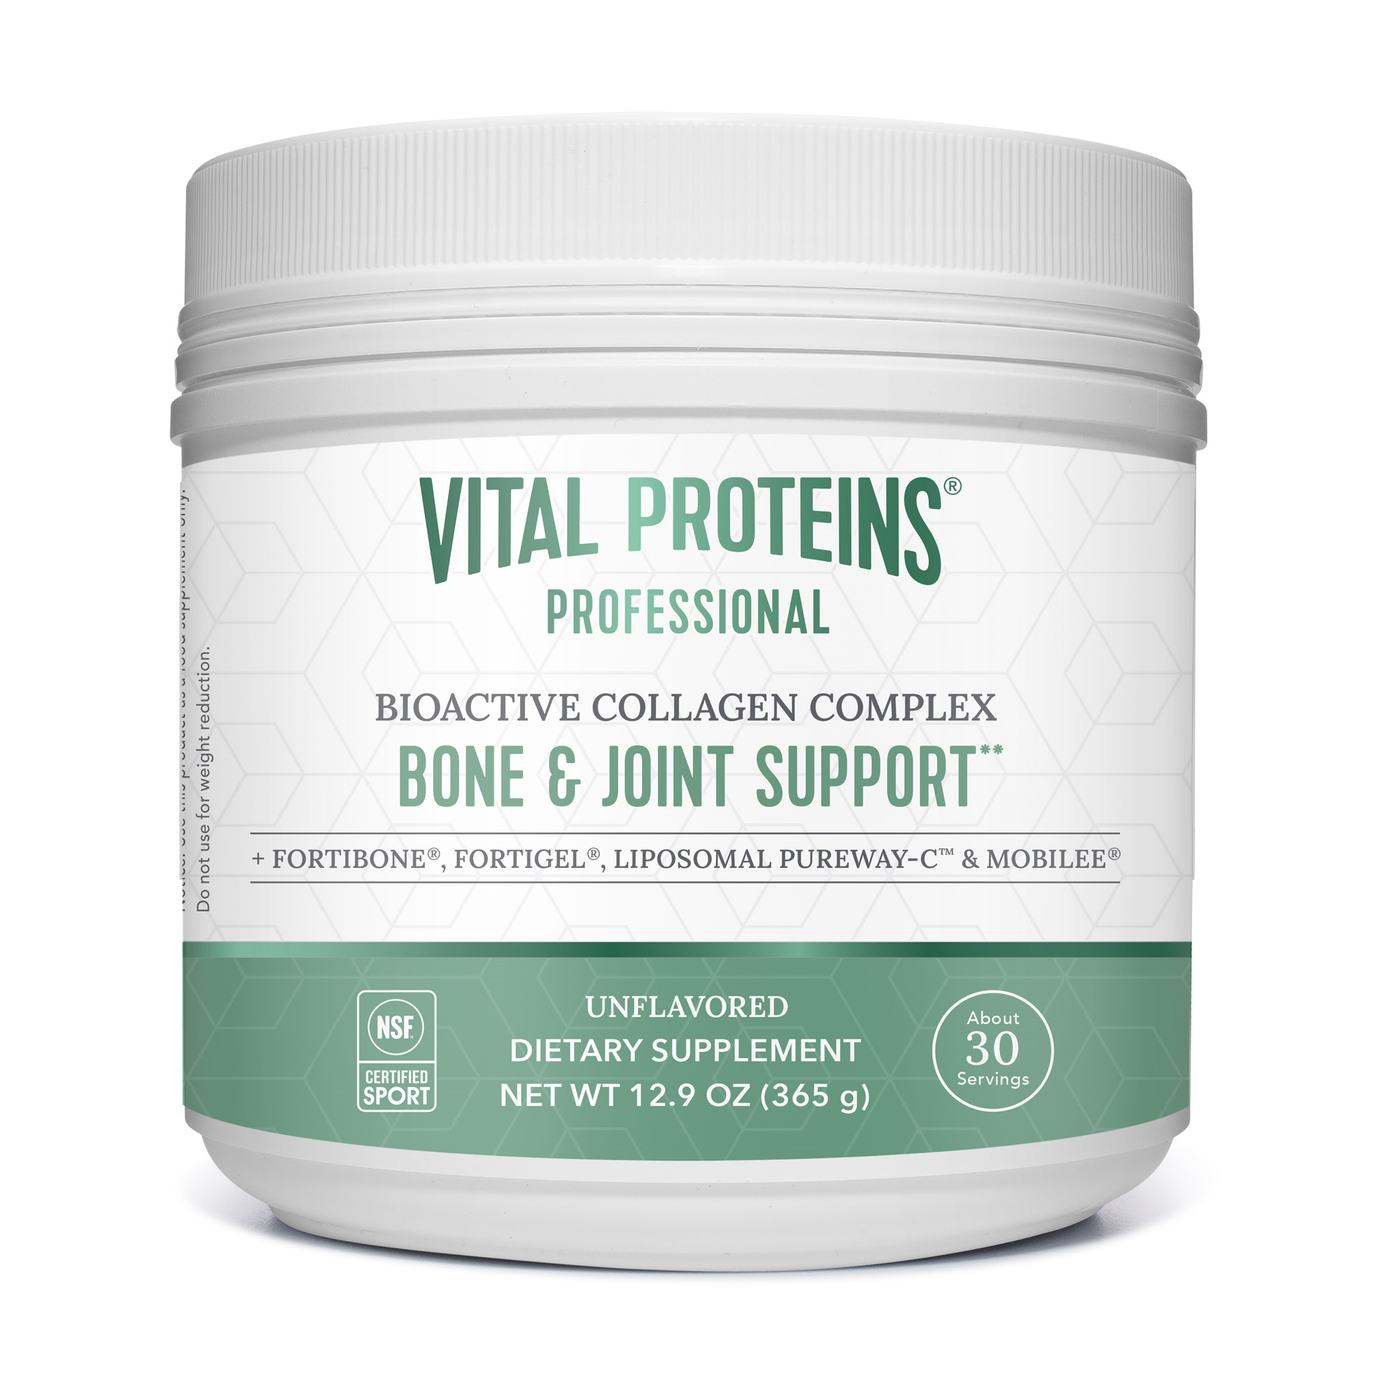 Bone & Joint Support 12.9oz Curated Wellness